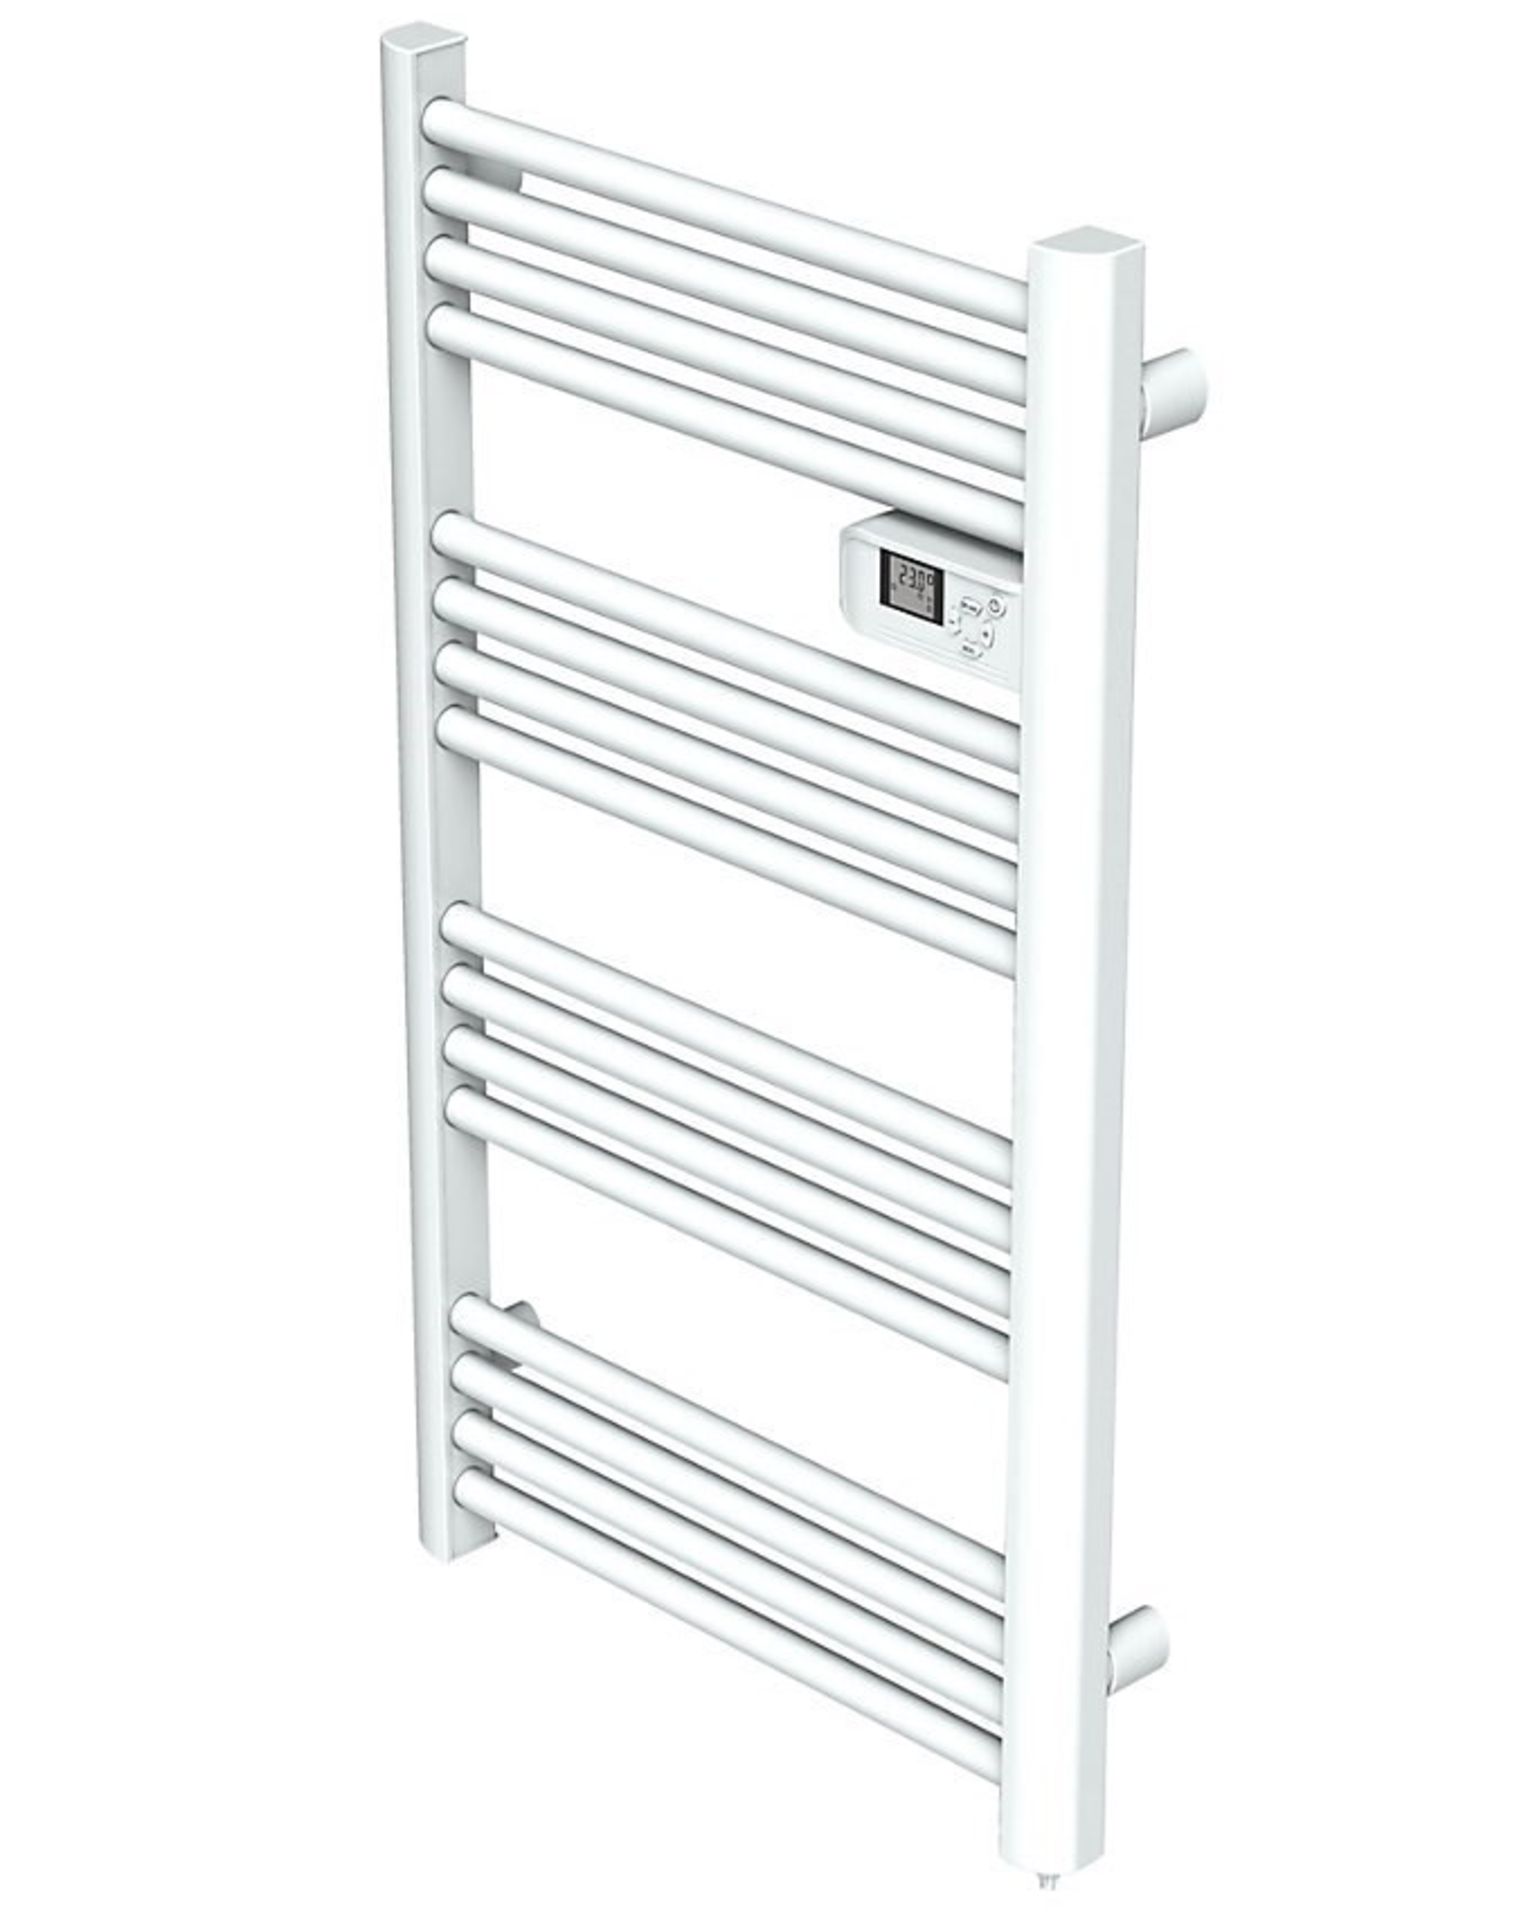 (VD148) 980x545mm 500W Electric White Towel warmer. RRP £164.00.This electrical 500W white to...